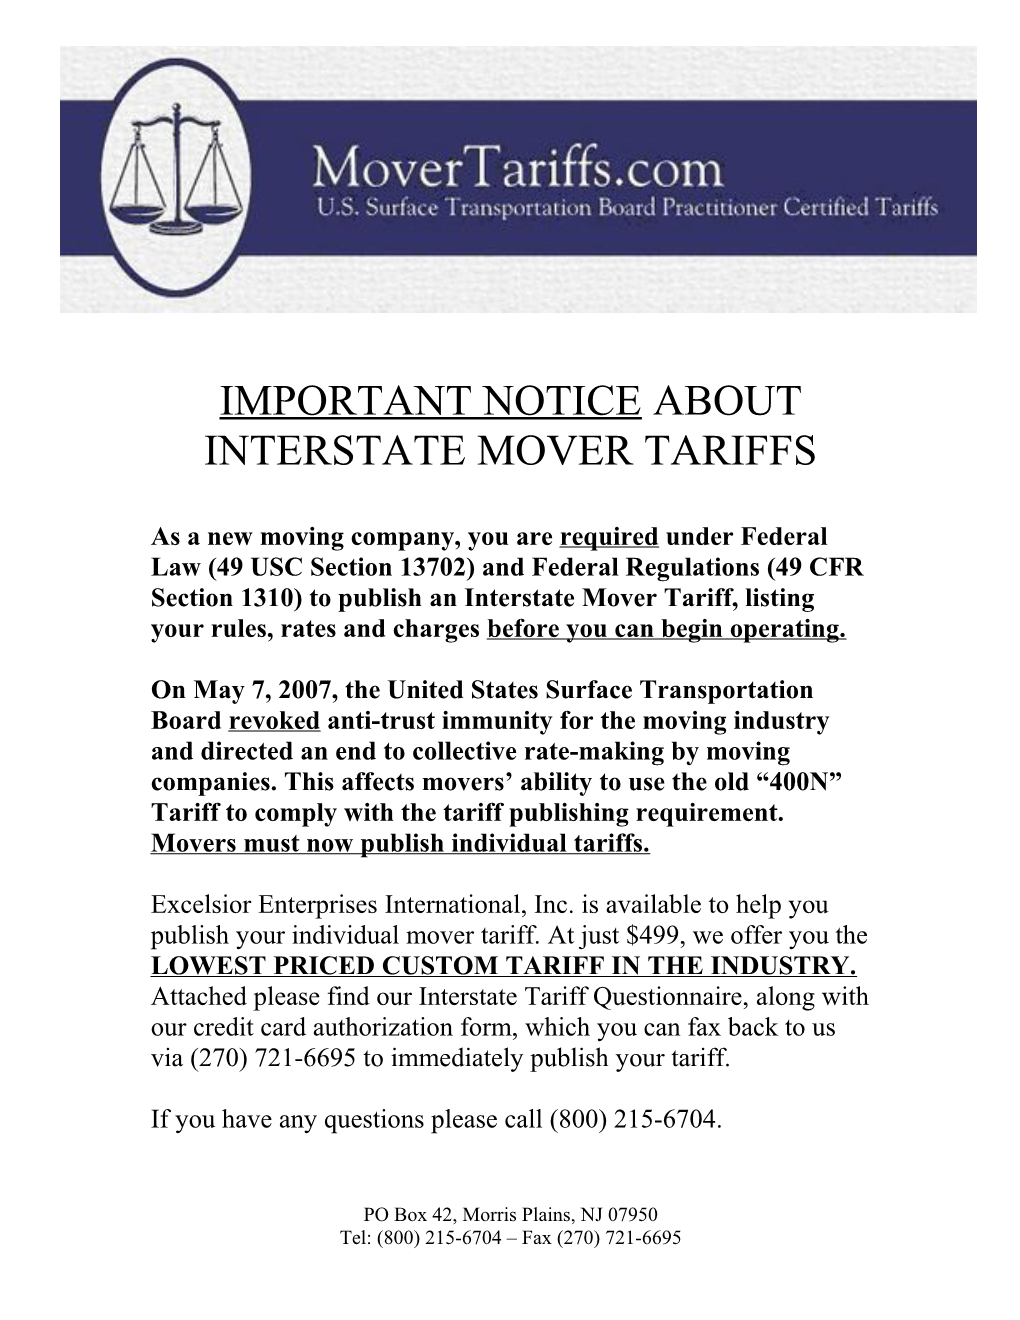 Important Notice About Interstate Mover Tariffs